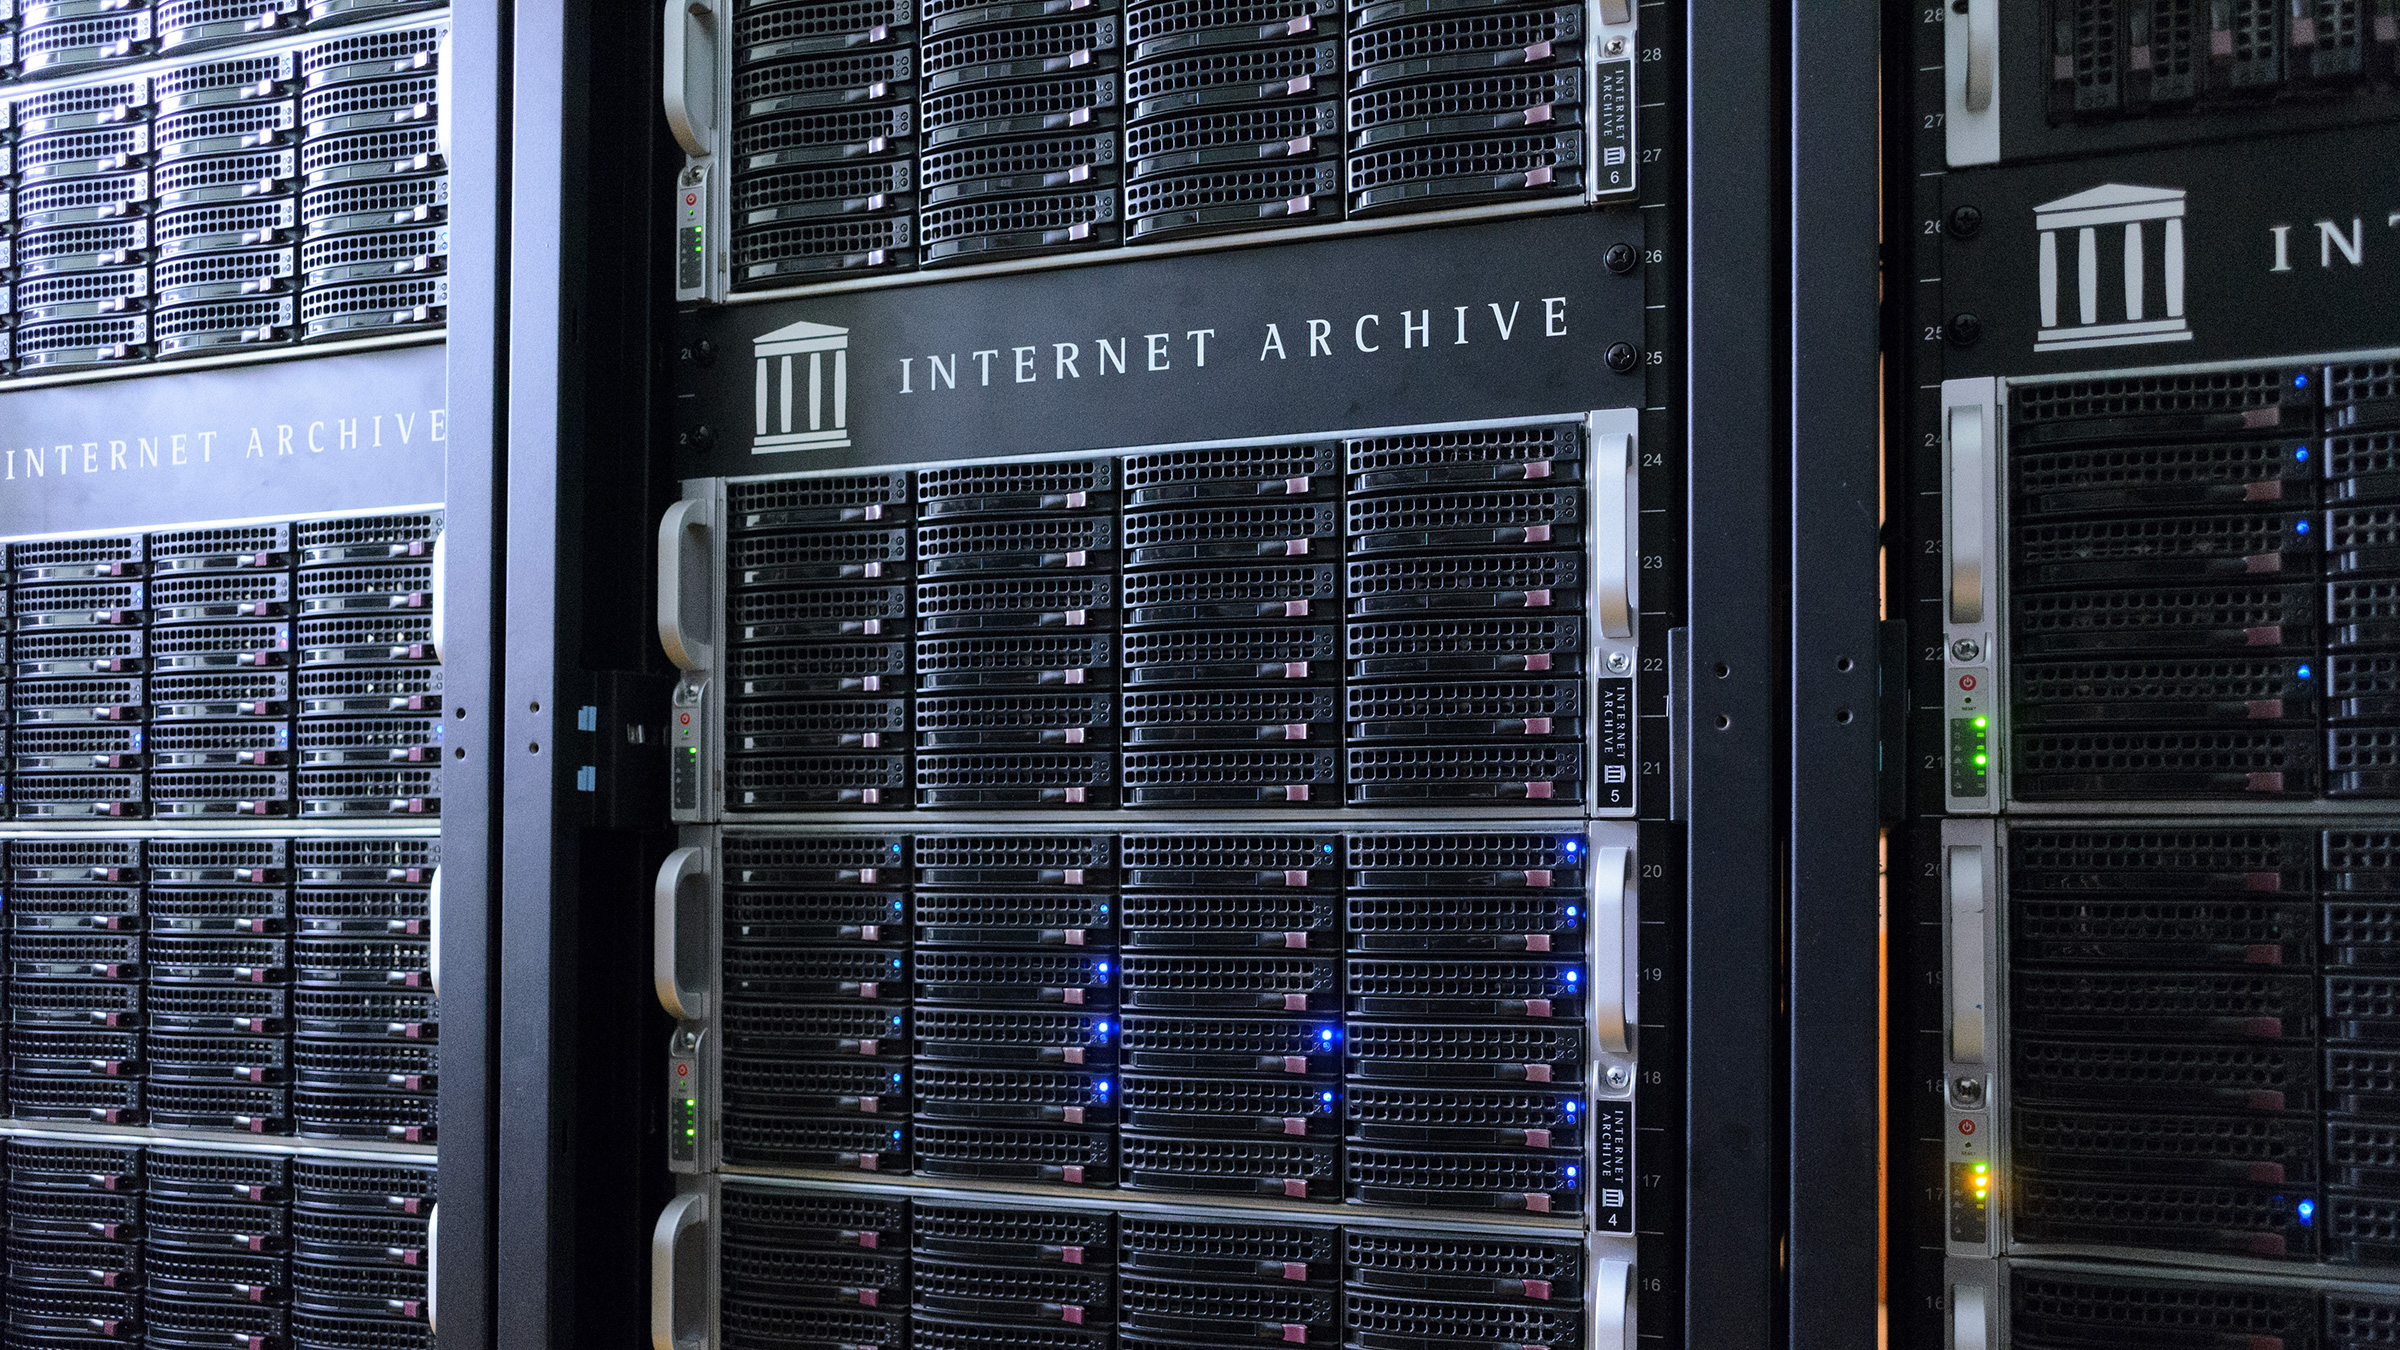 console servers labeled 'Internet Archive'